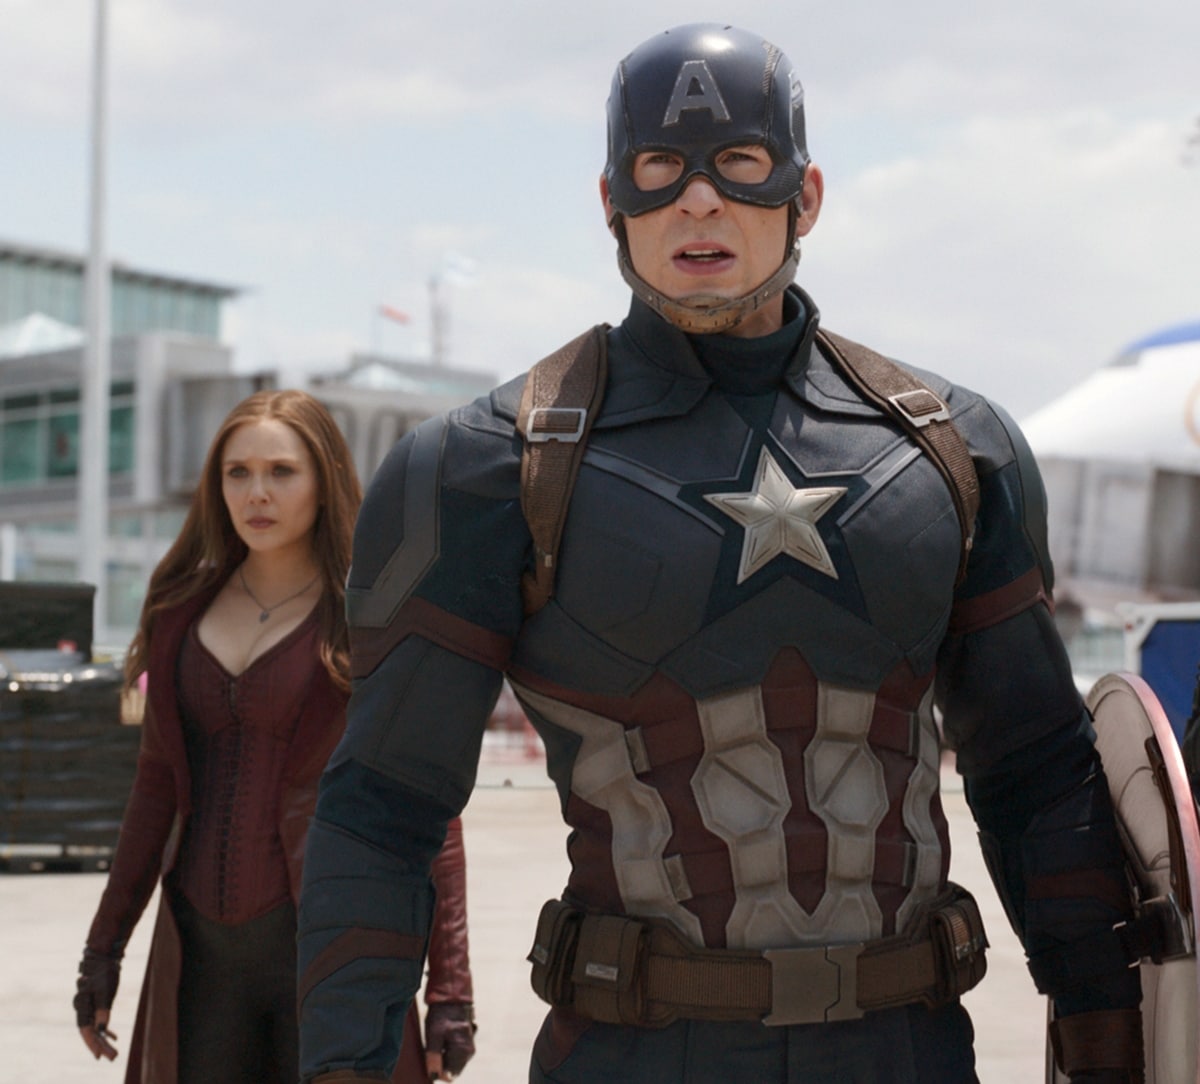 The Captain America: Civil War stars Chris Evans and Elizabeth Olsen told Ellen they've never dated in real life